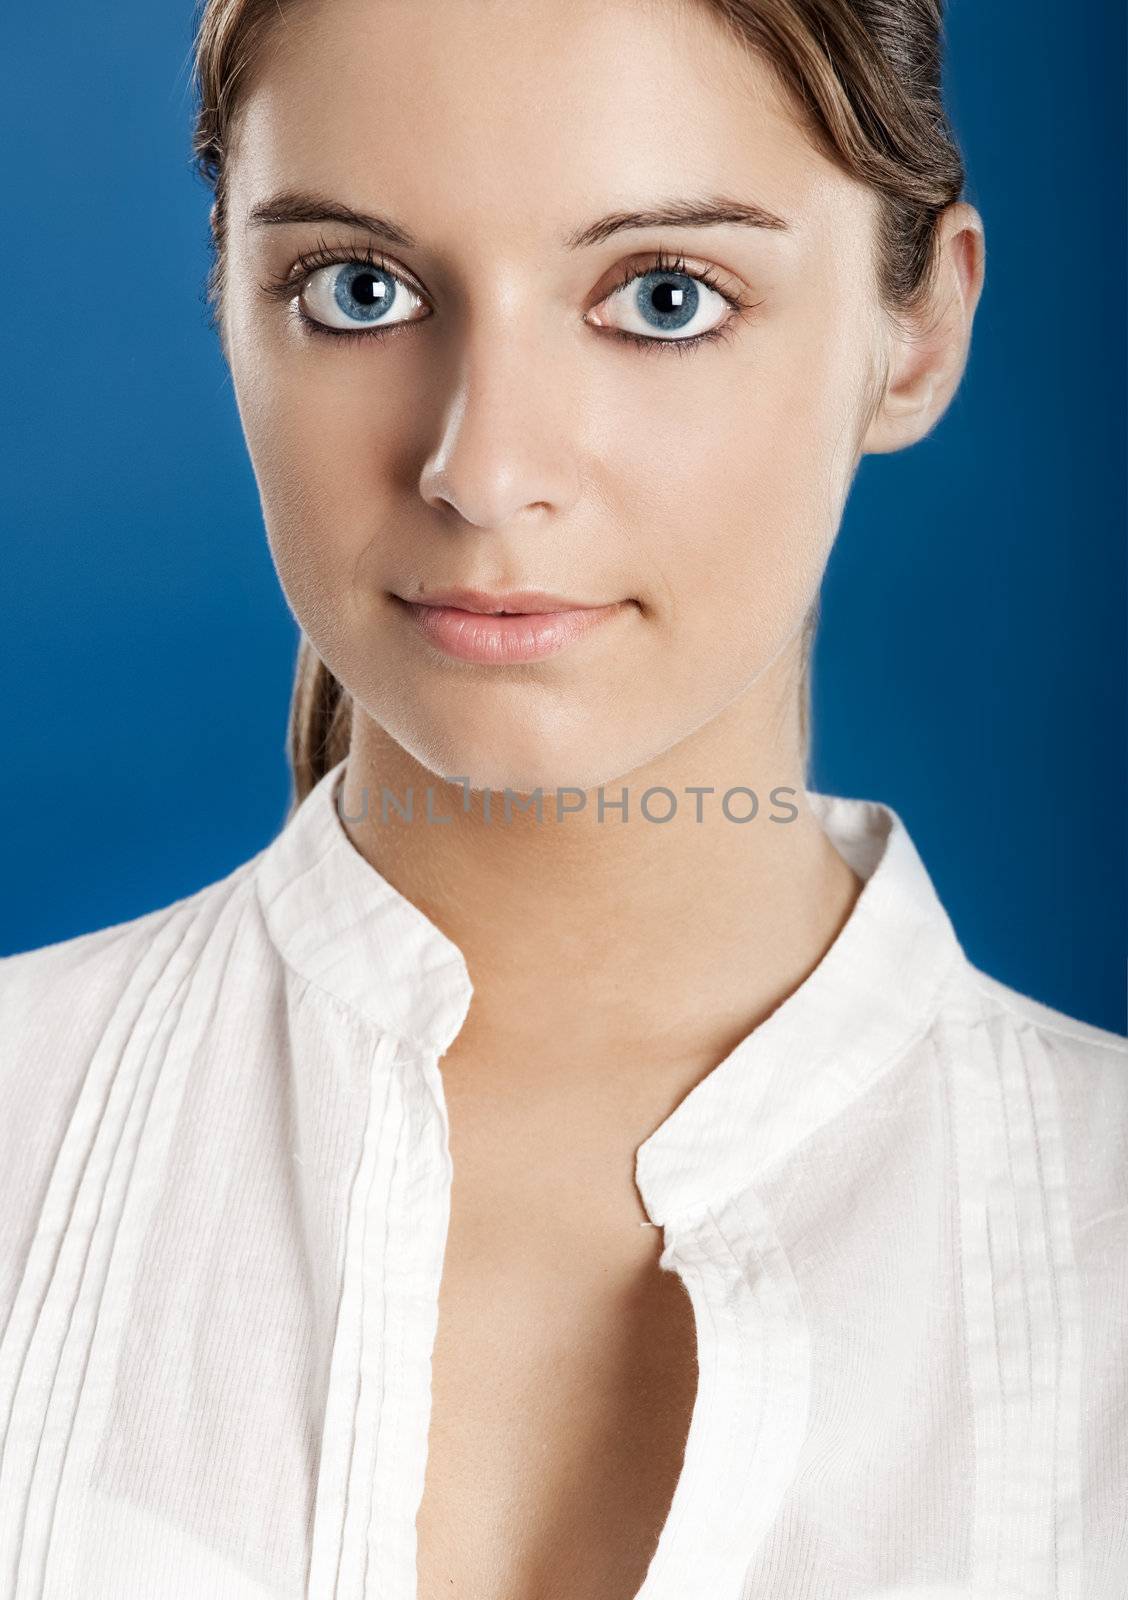 Close-up portrait of a Fresh and Beautiful young woman